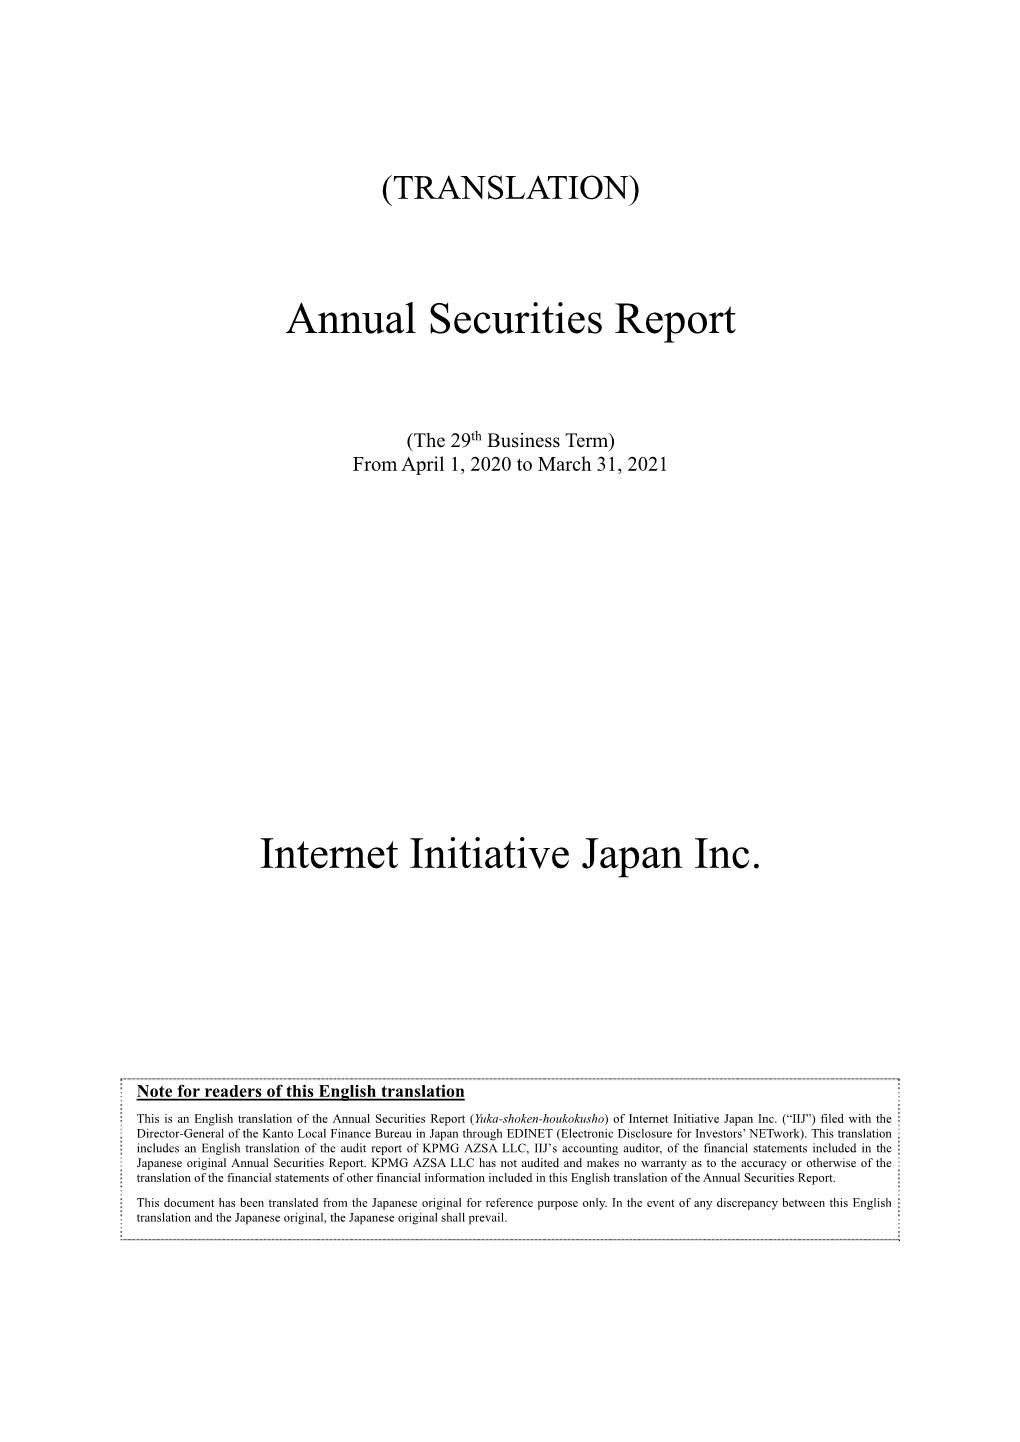 Annual Securities Report for FY2020